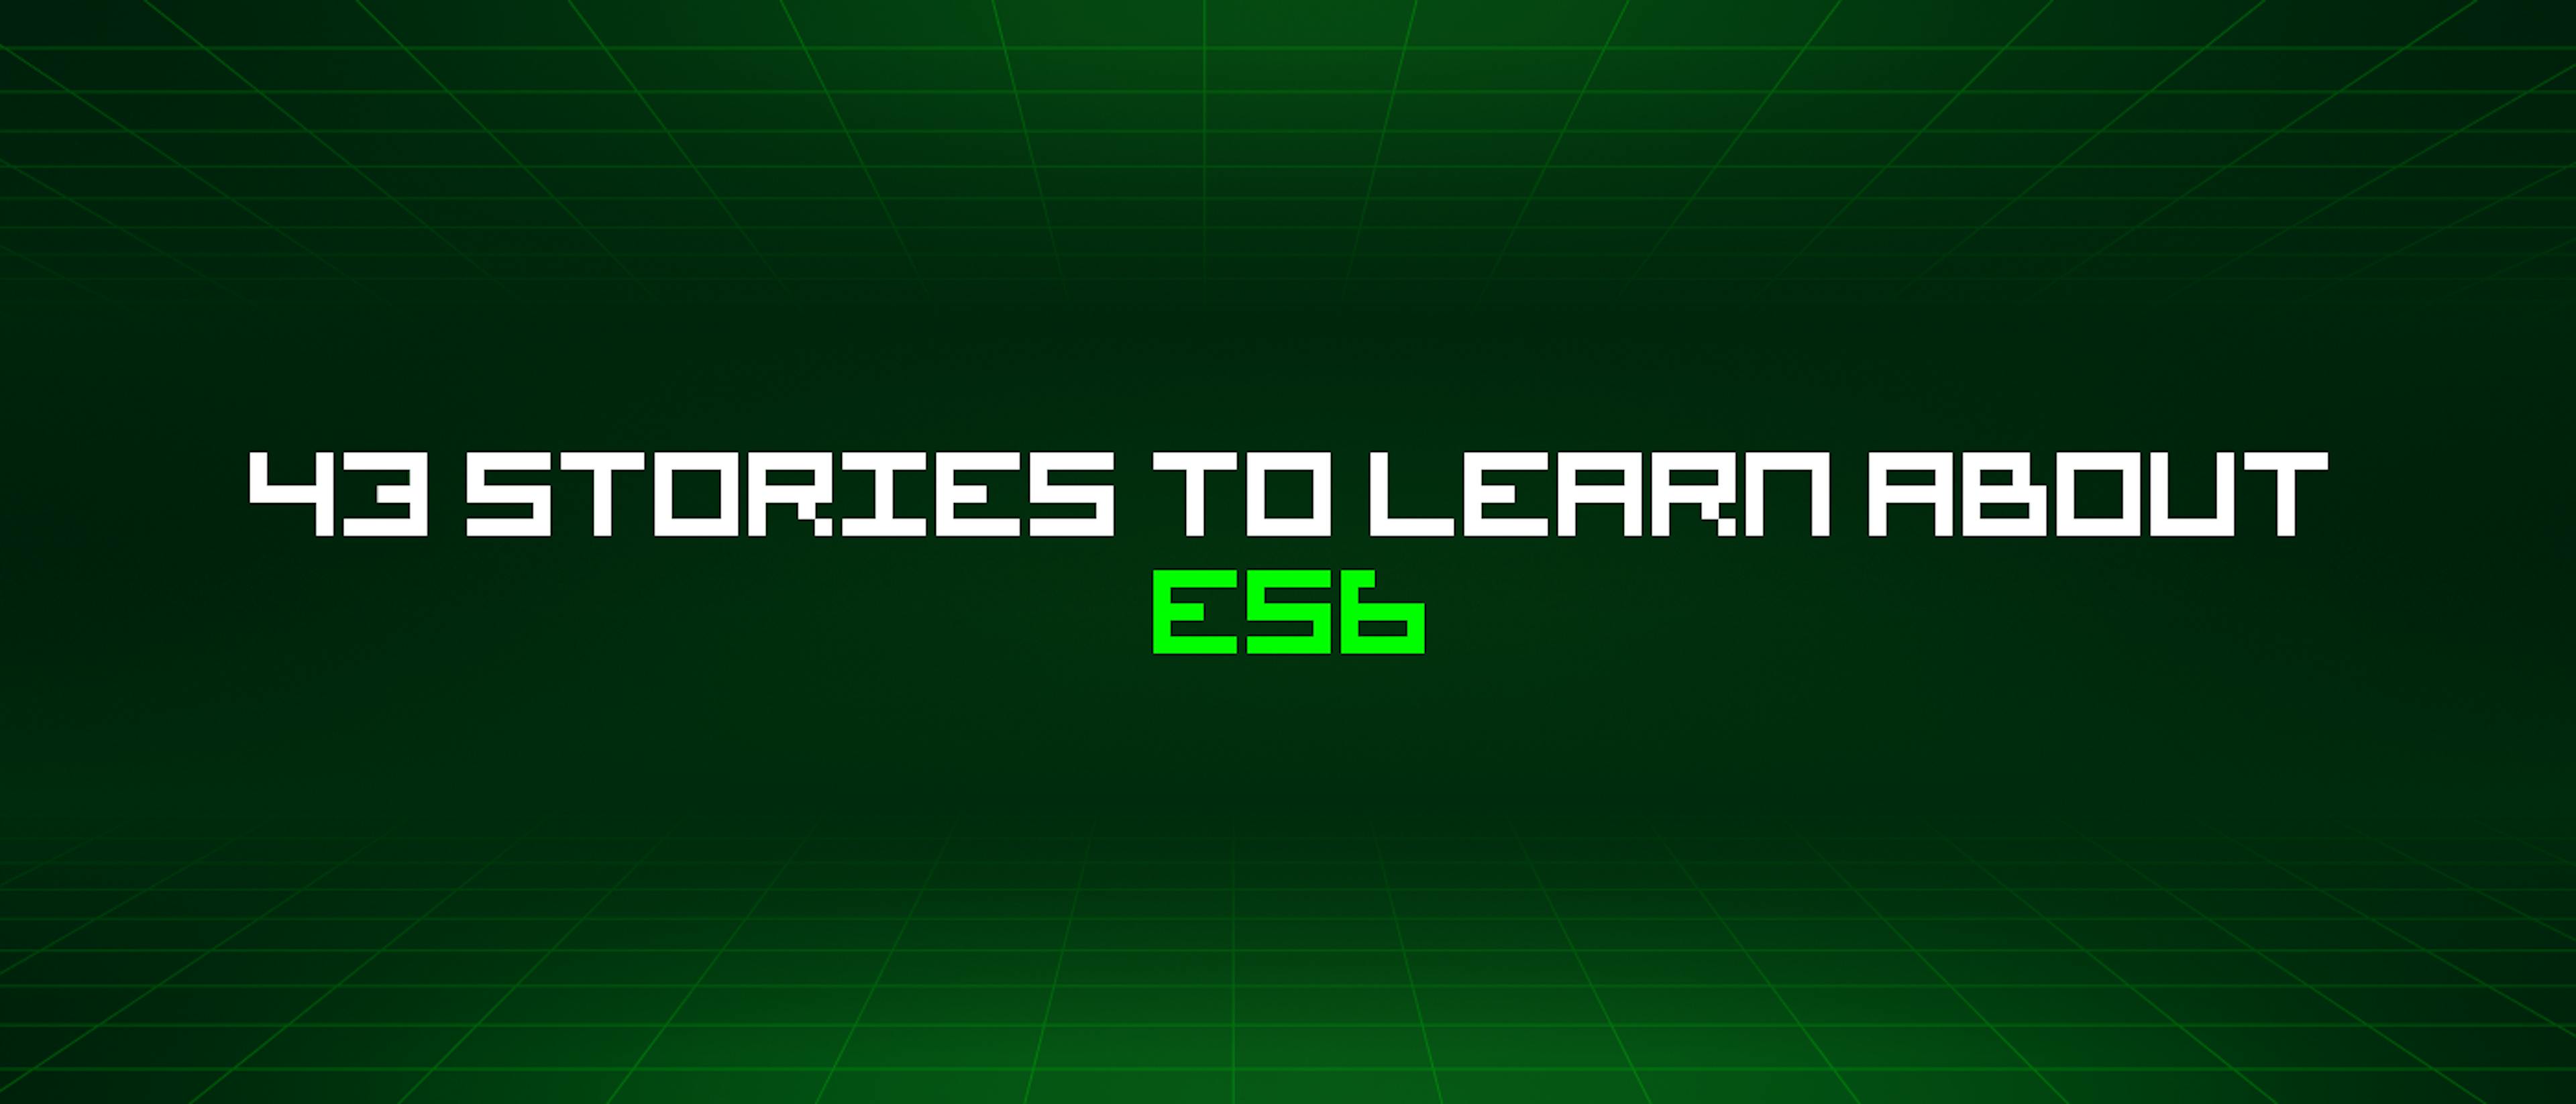 featured image - 43 Stories To Learn About Es6